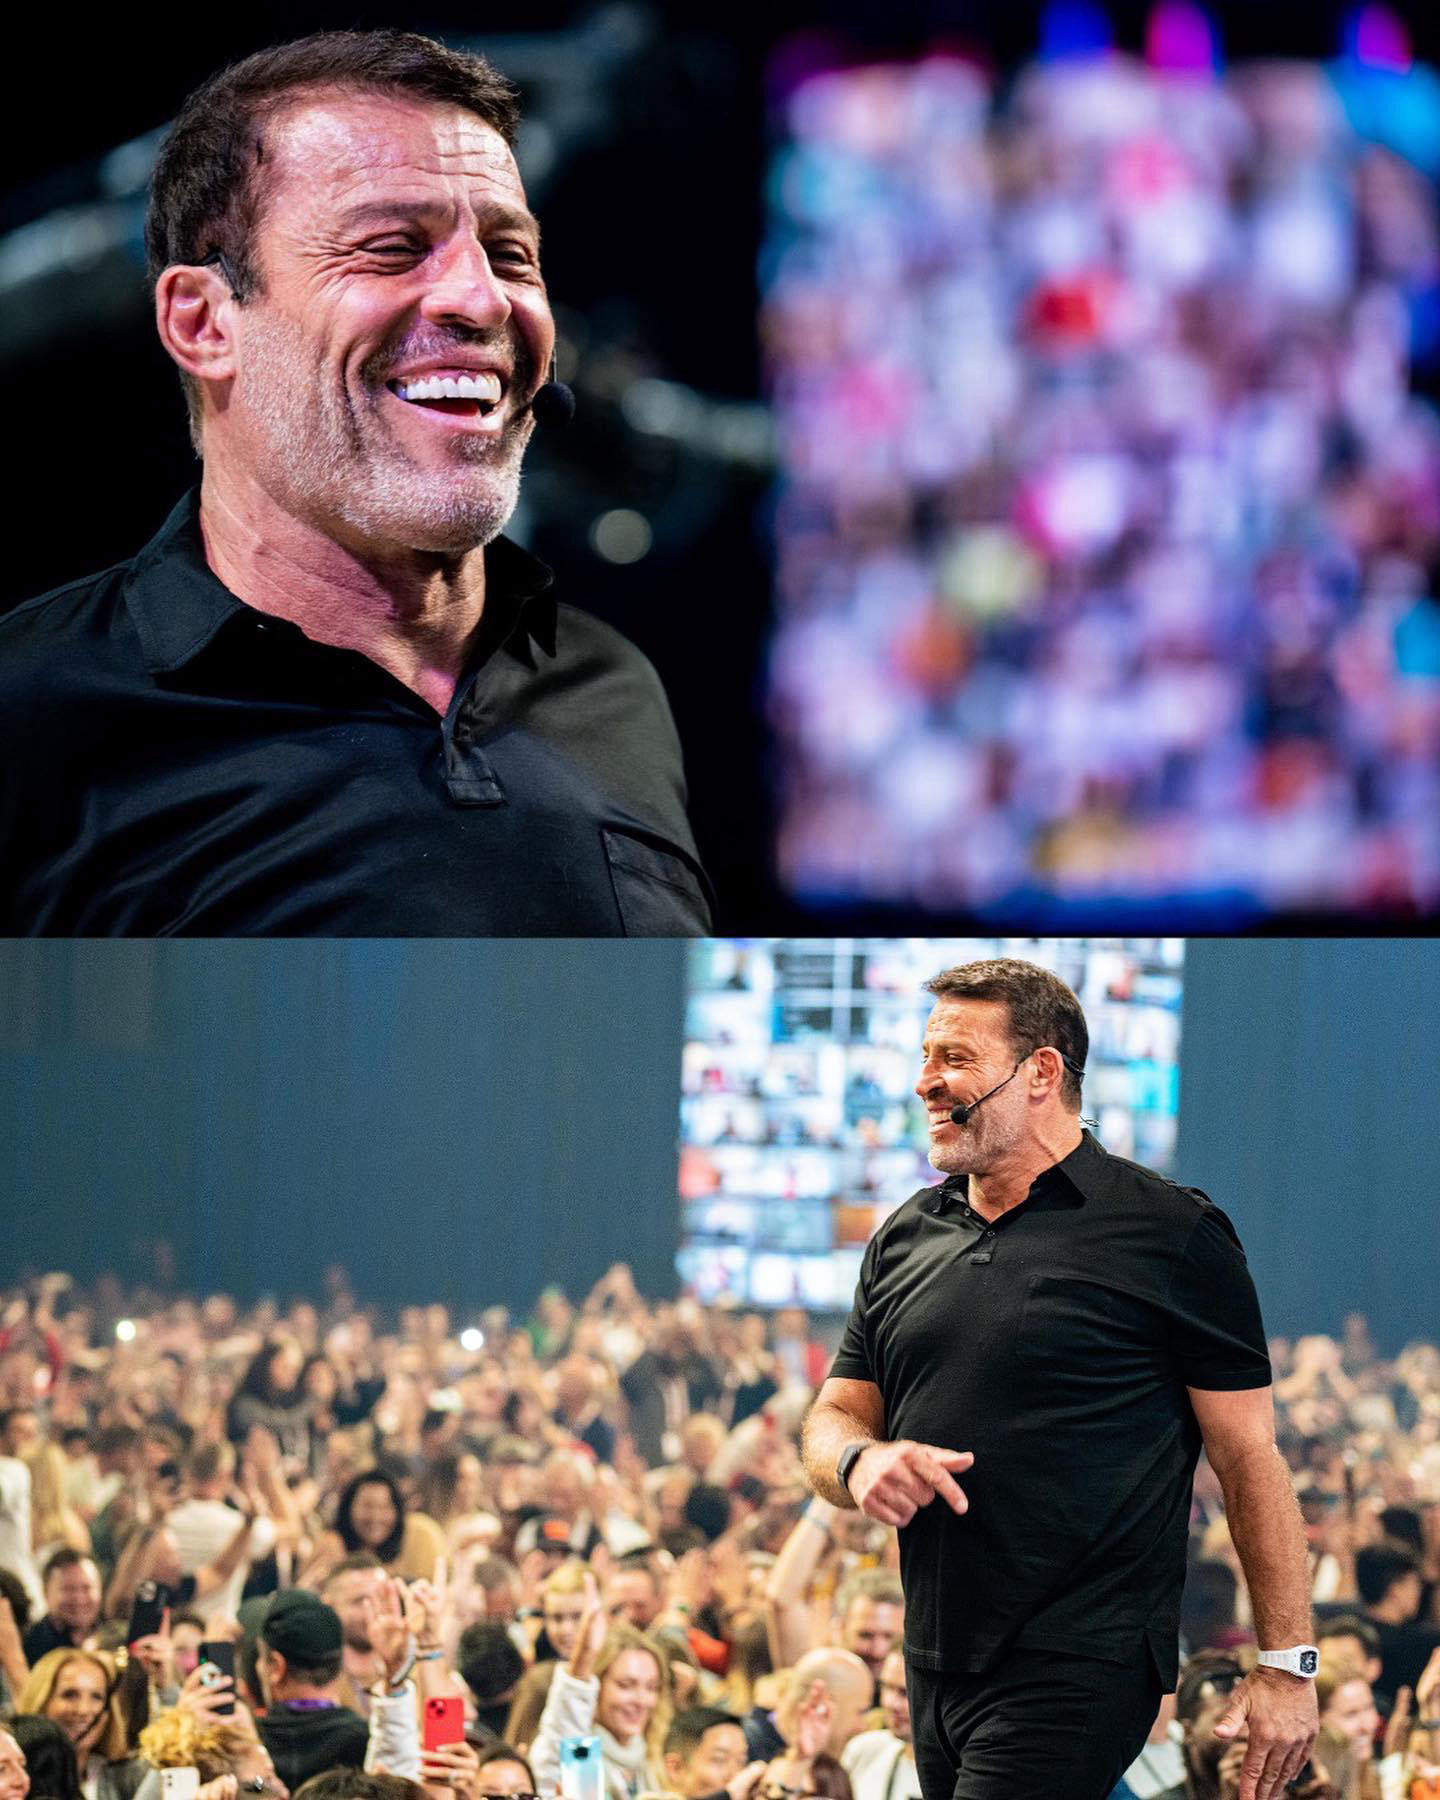 Tony Robbins - 10,000 vibes in the convention center + thousands more zoomin it in